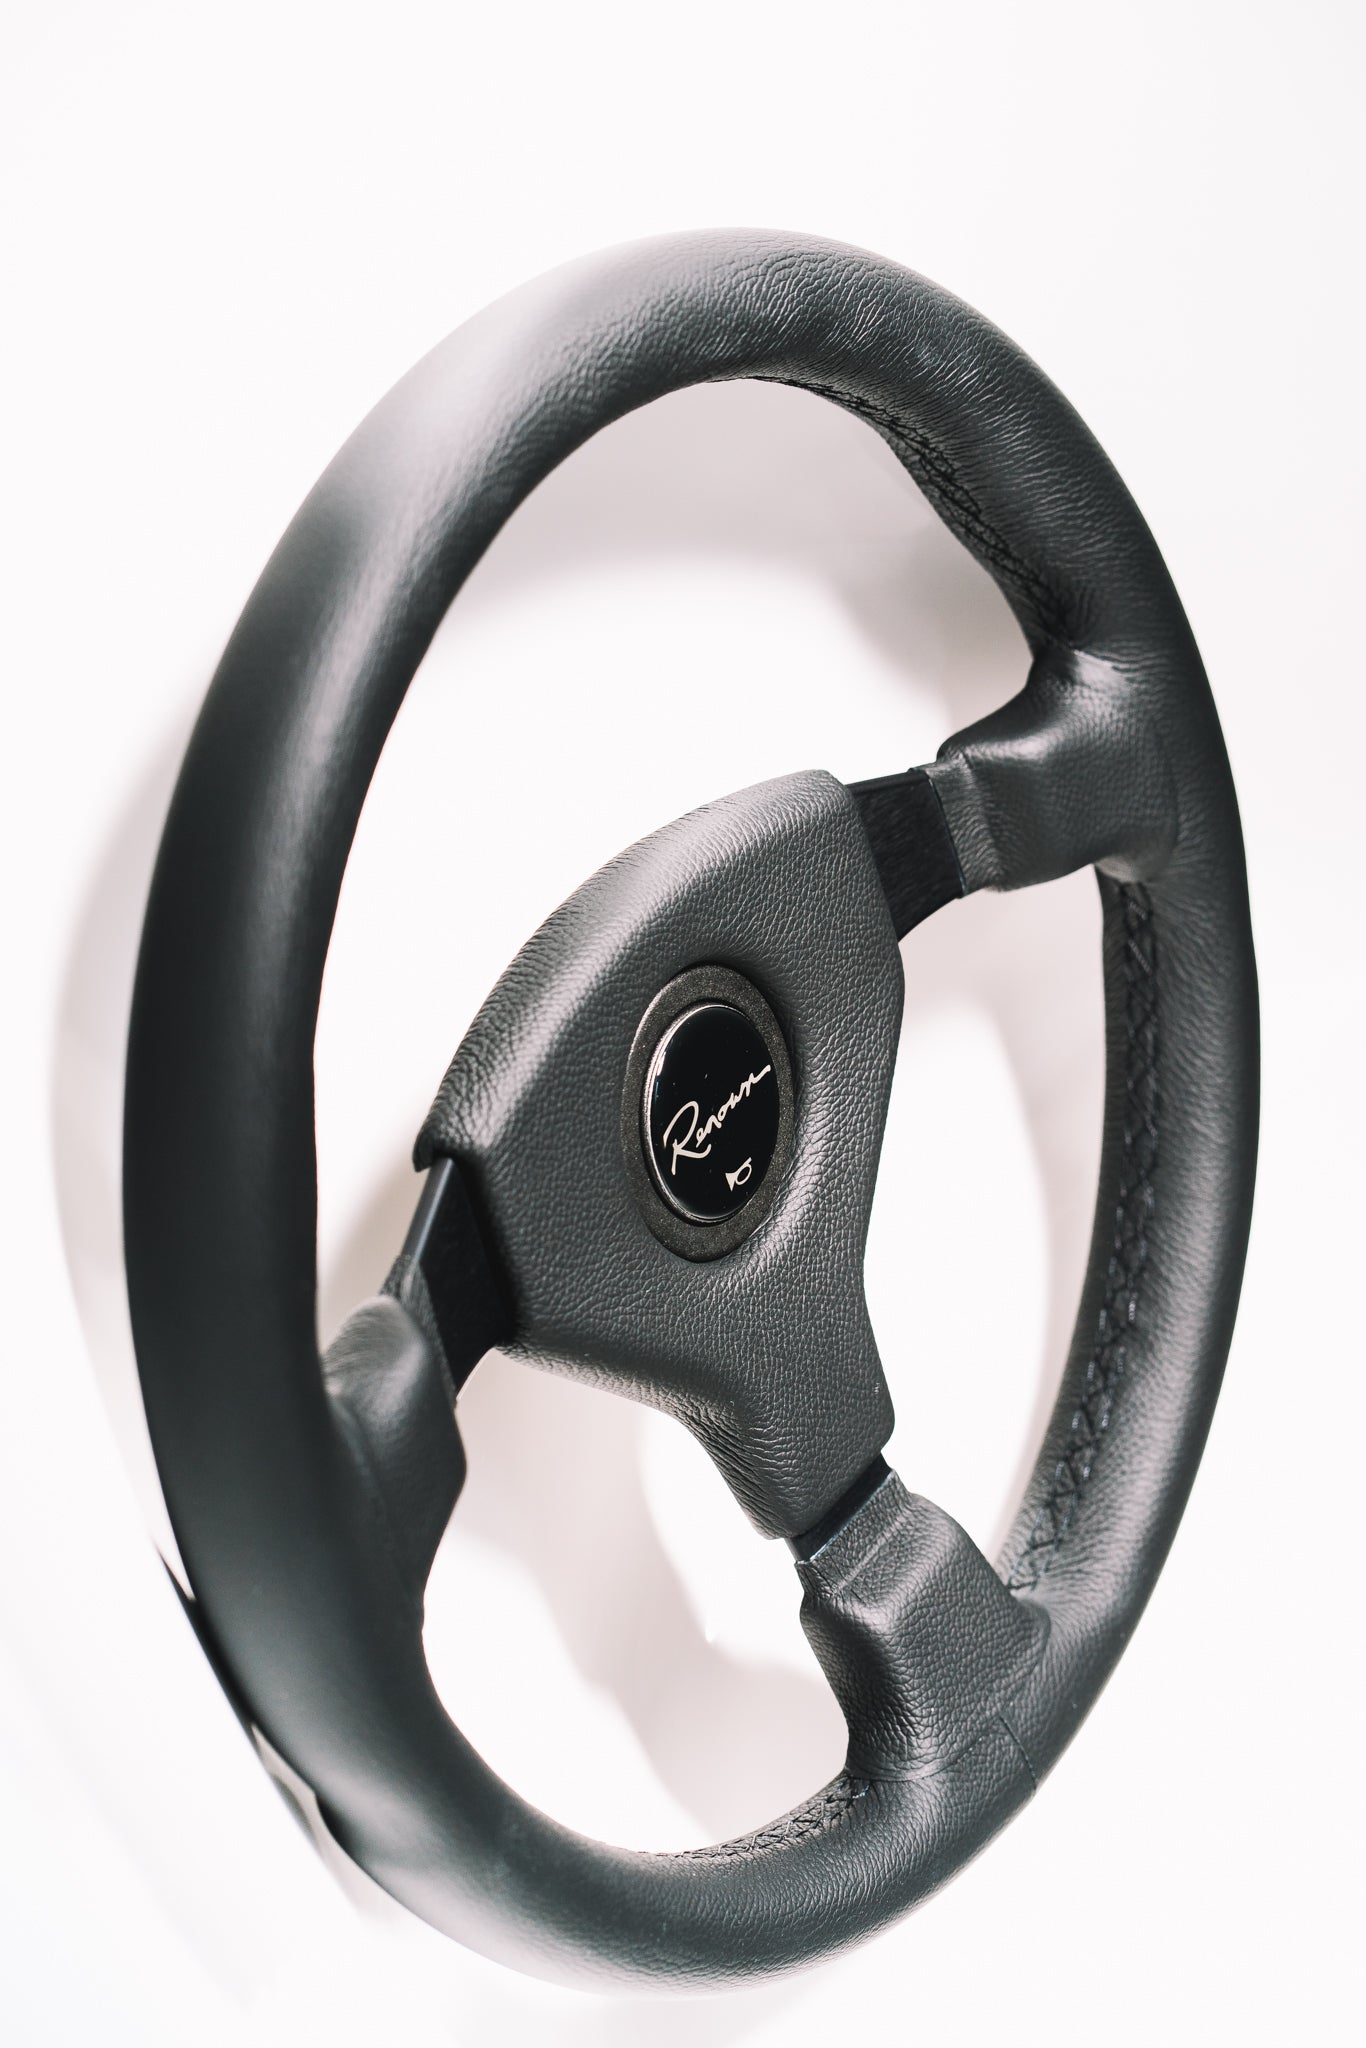 Renown Champion Horn Pad Leather Steering Wheel